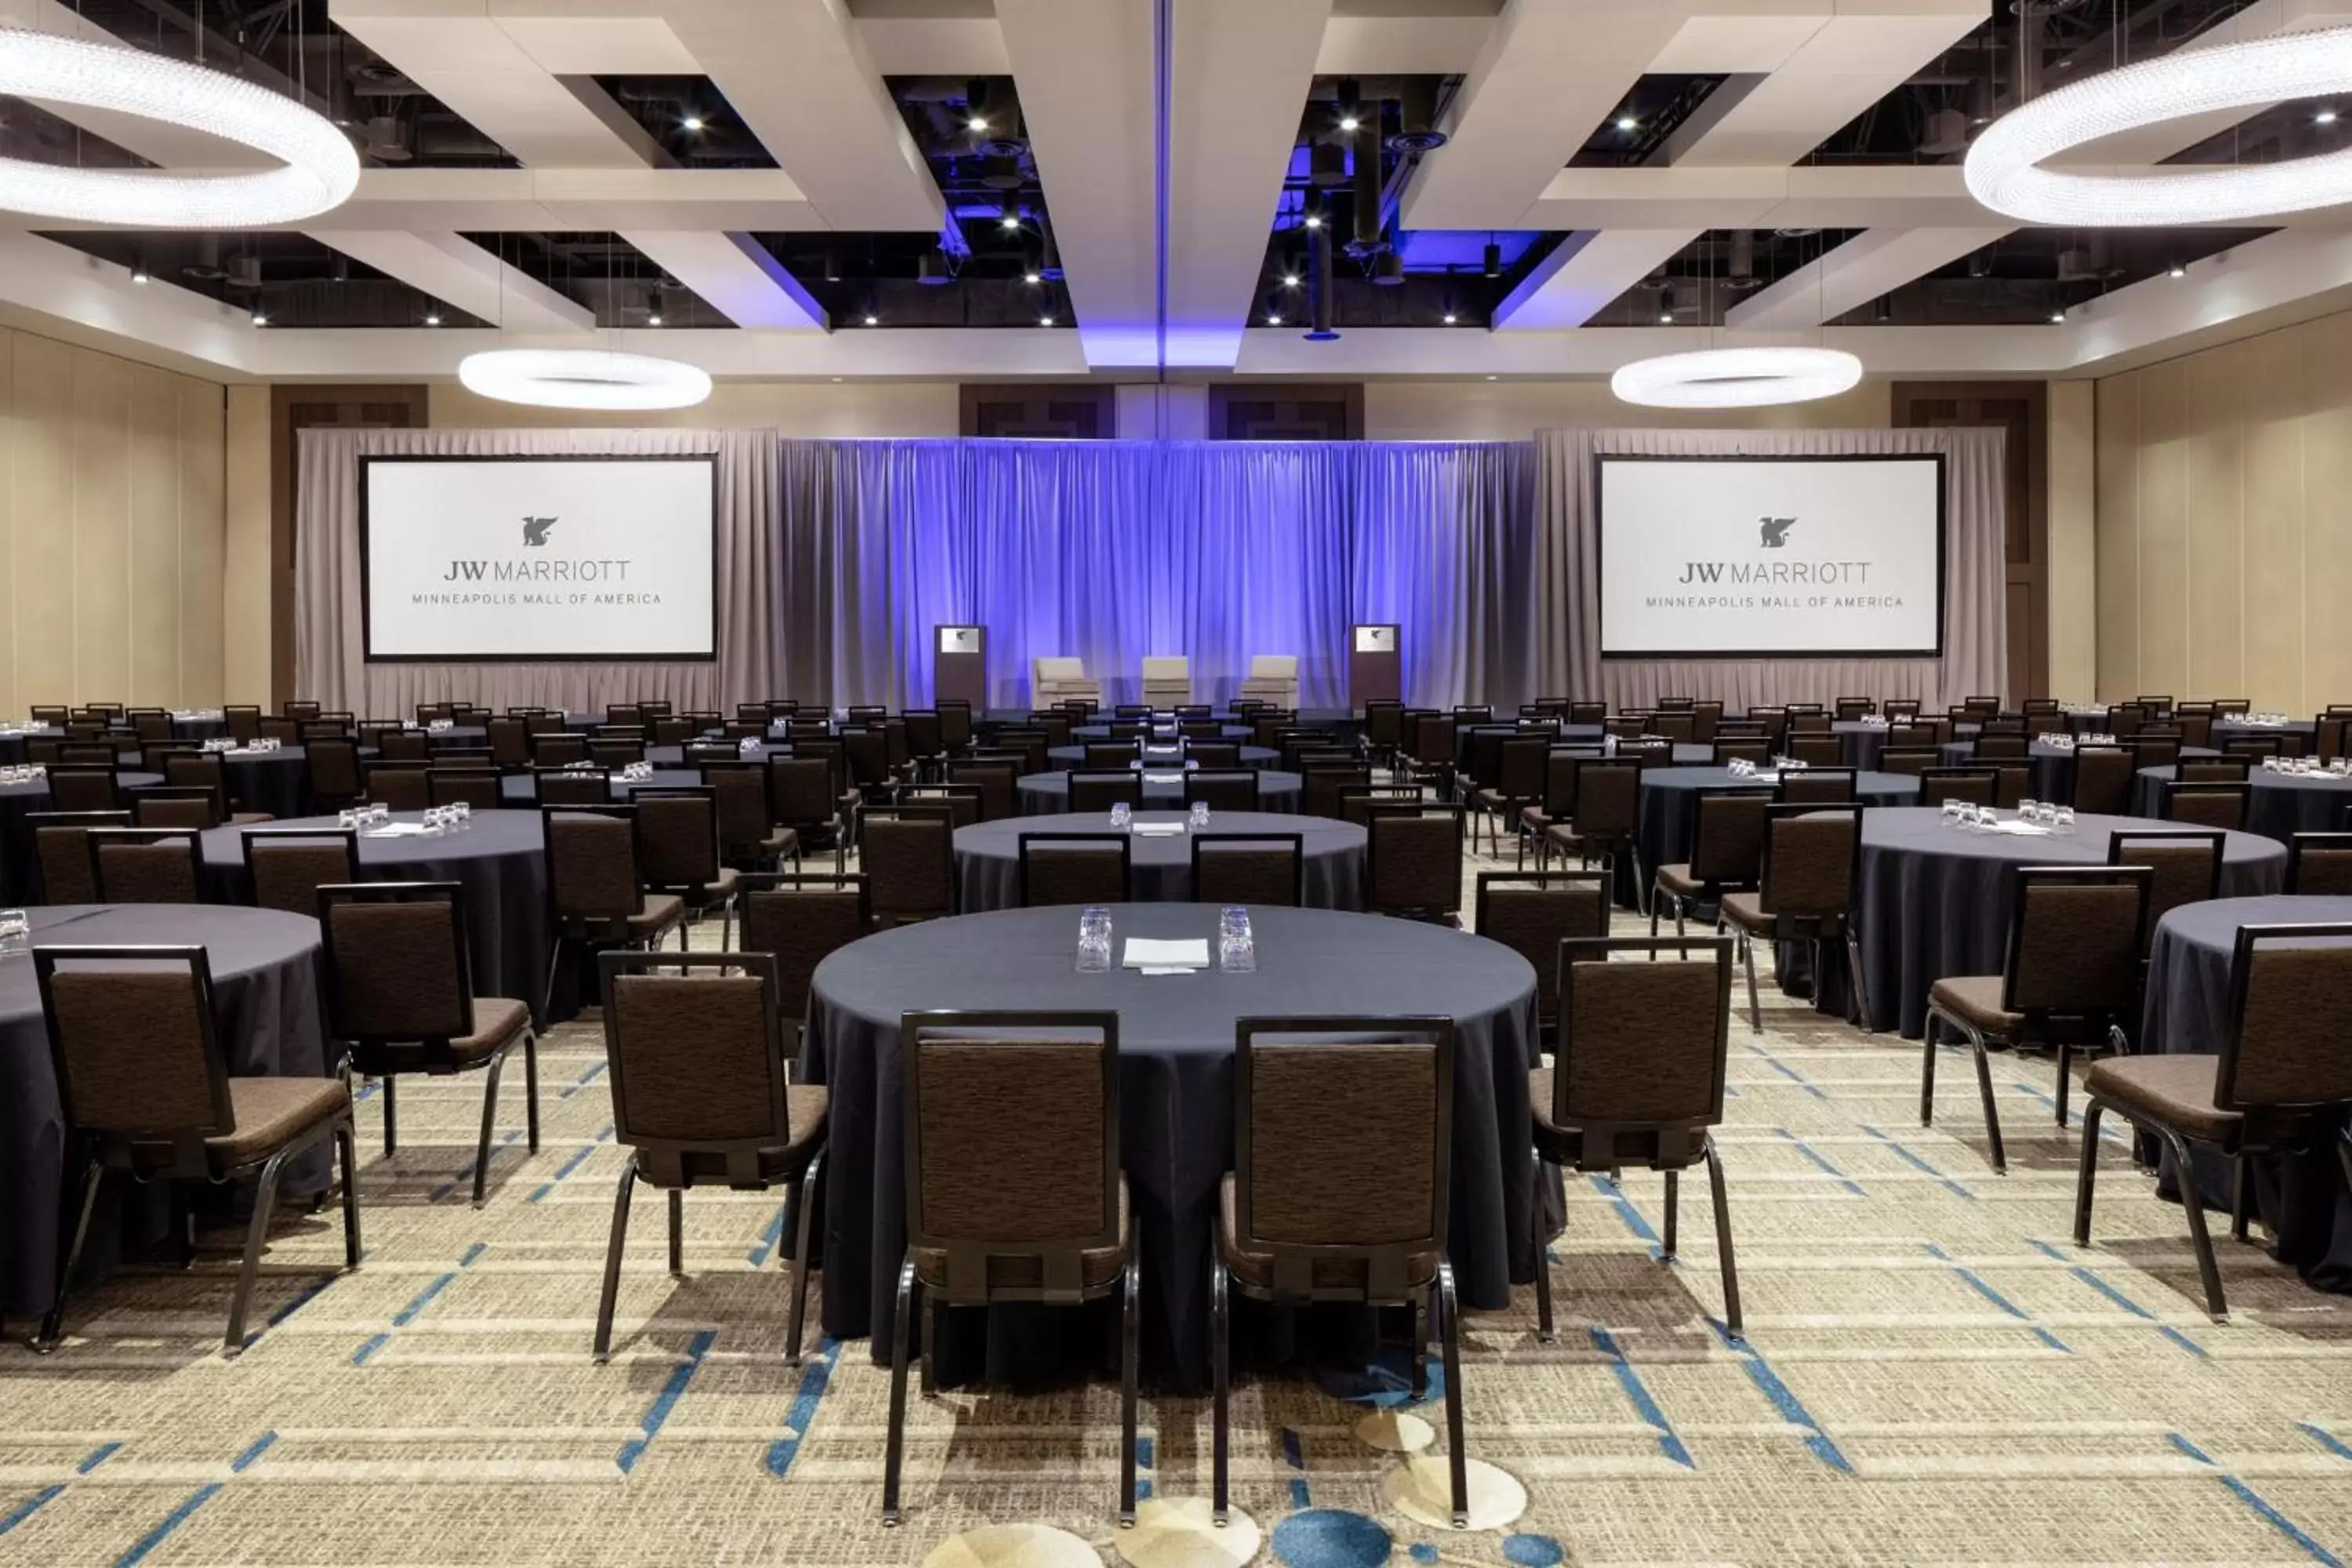 Meeting/conference room in JW Marriott Minneapolis Mall of America